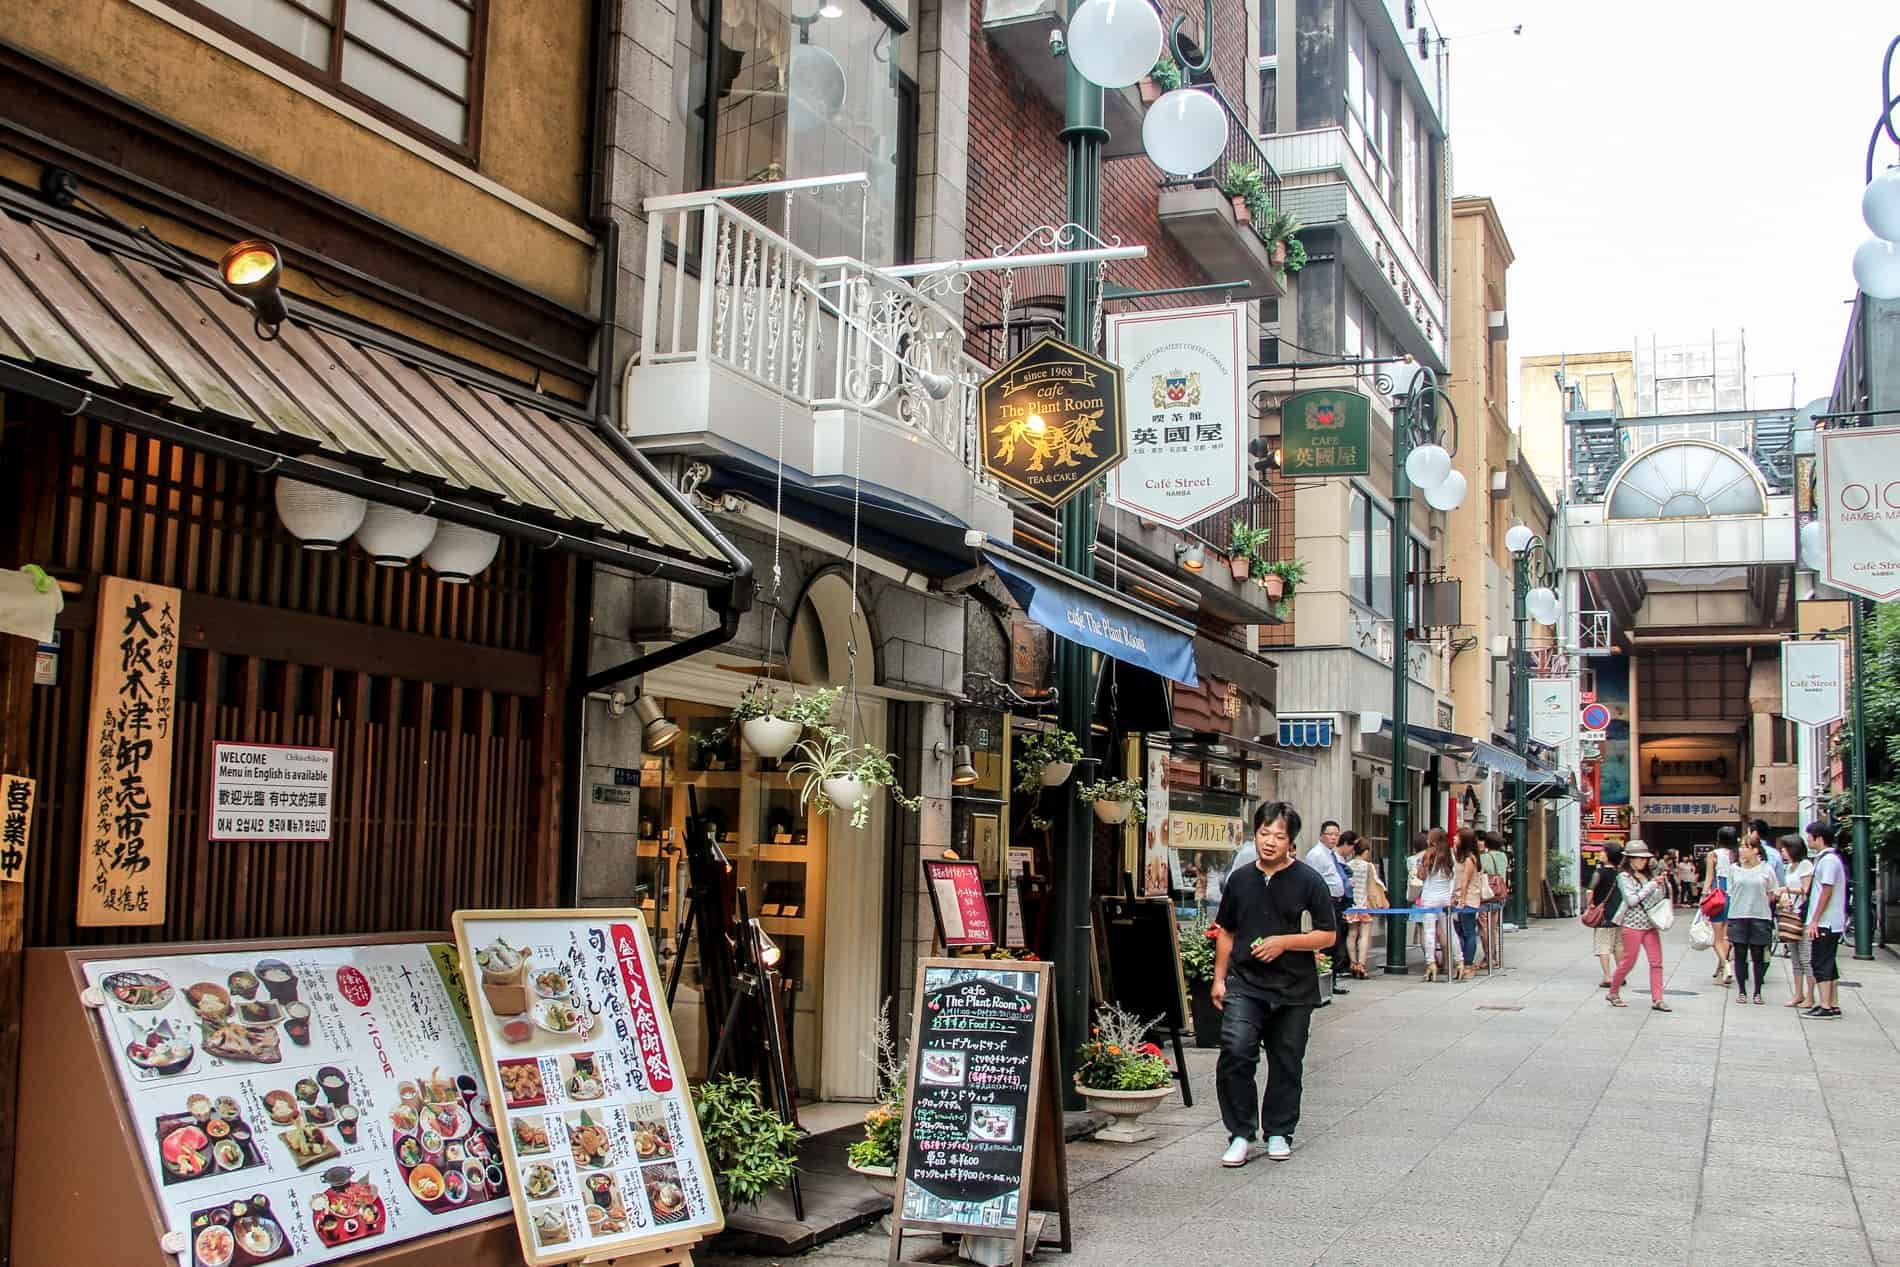 A small street in Osaka lined back-to-back with cafes.